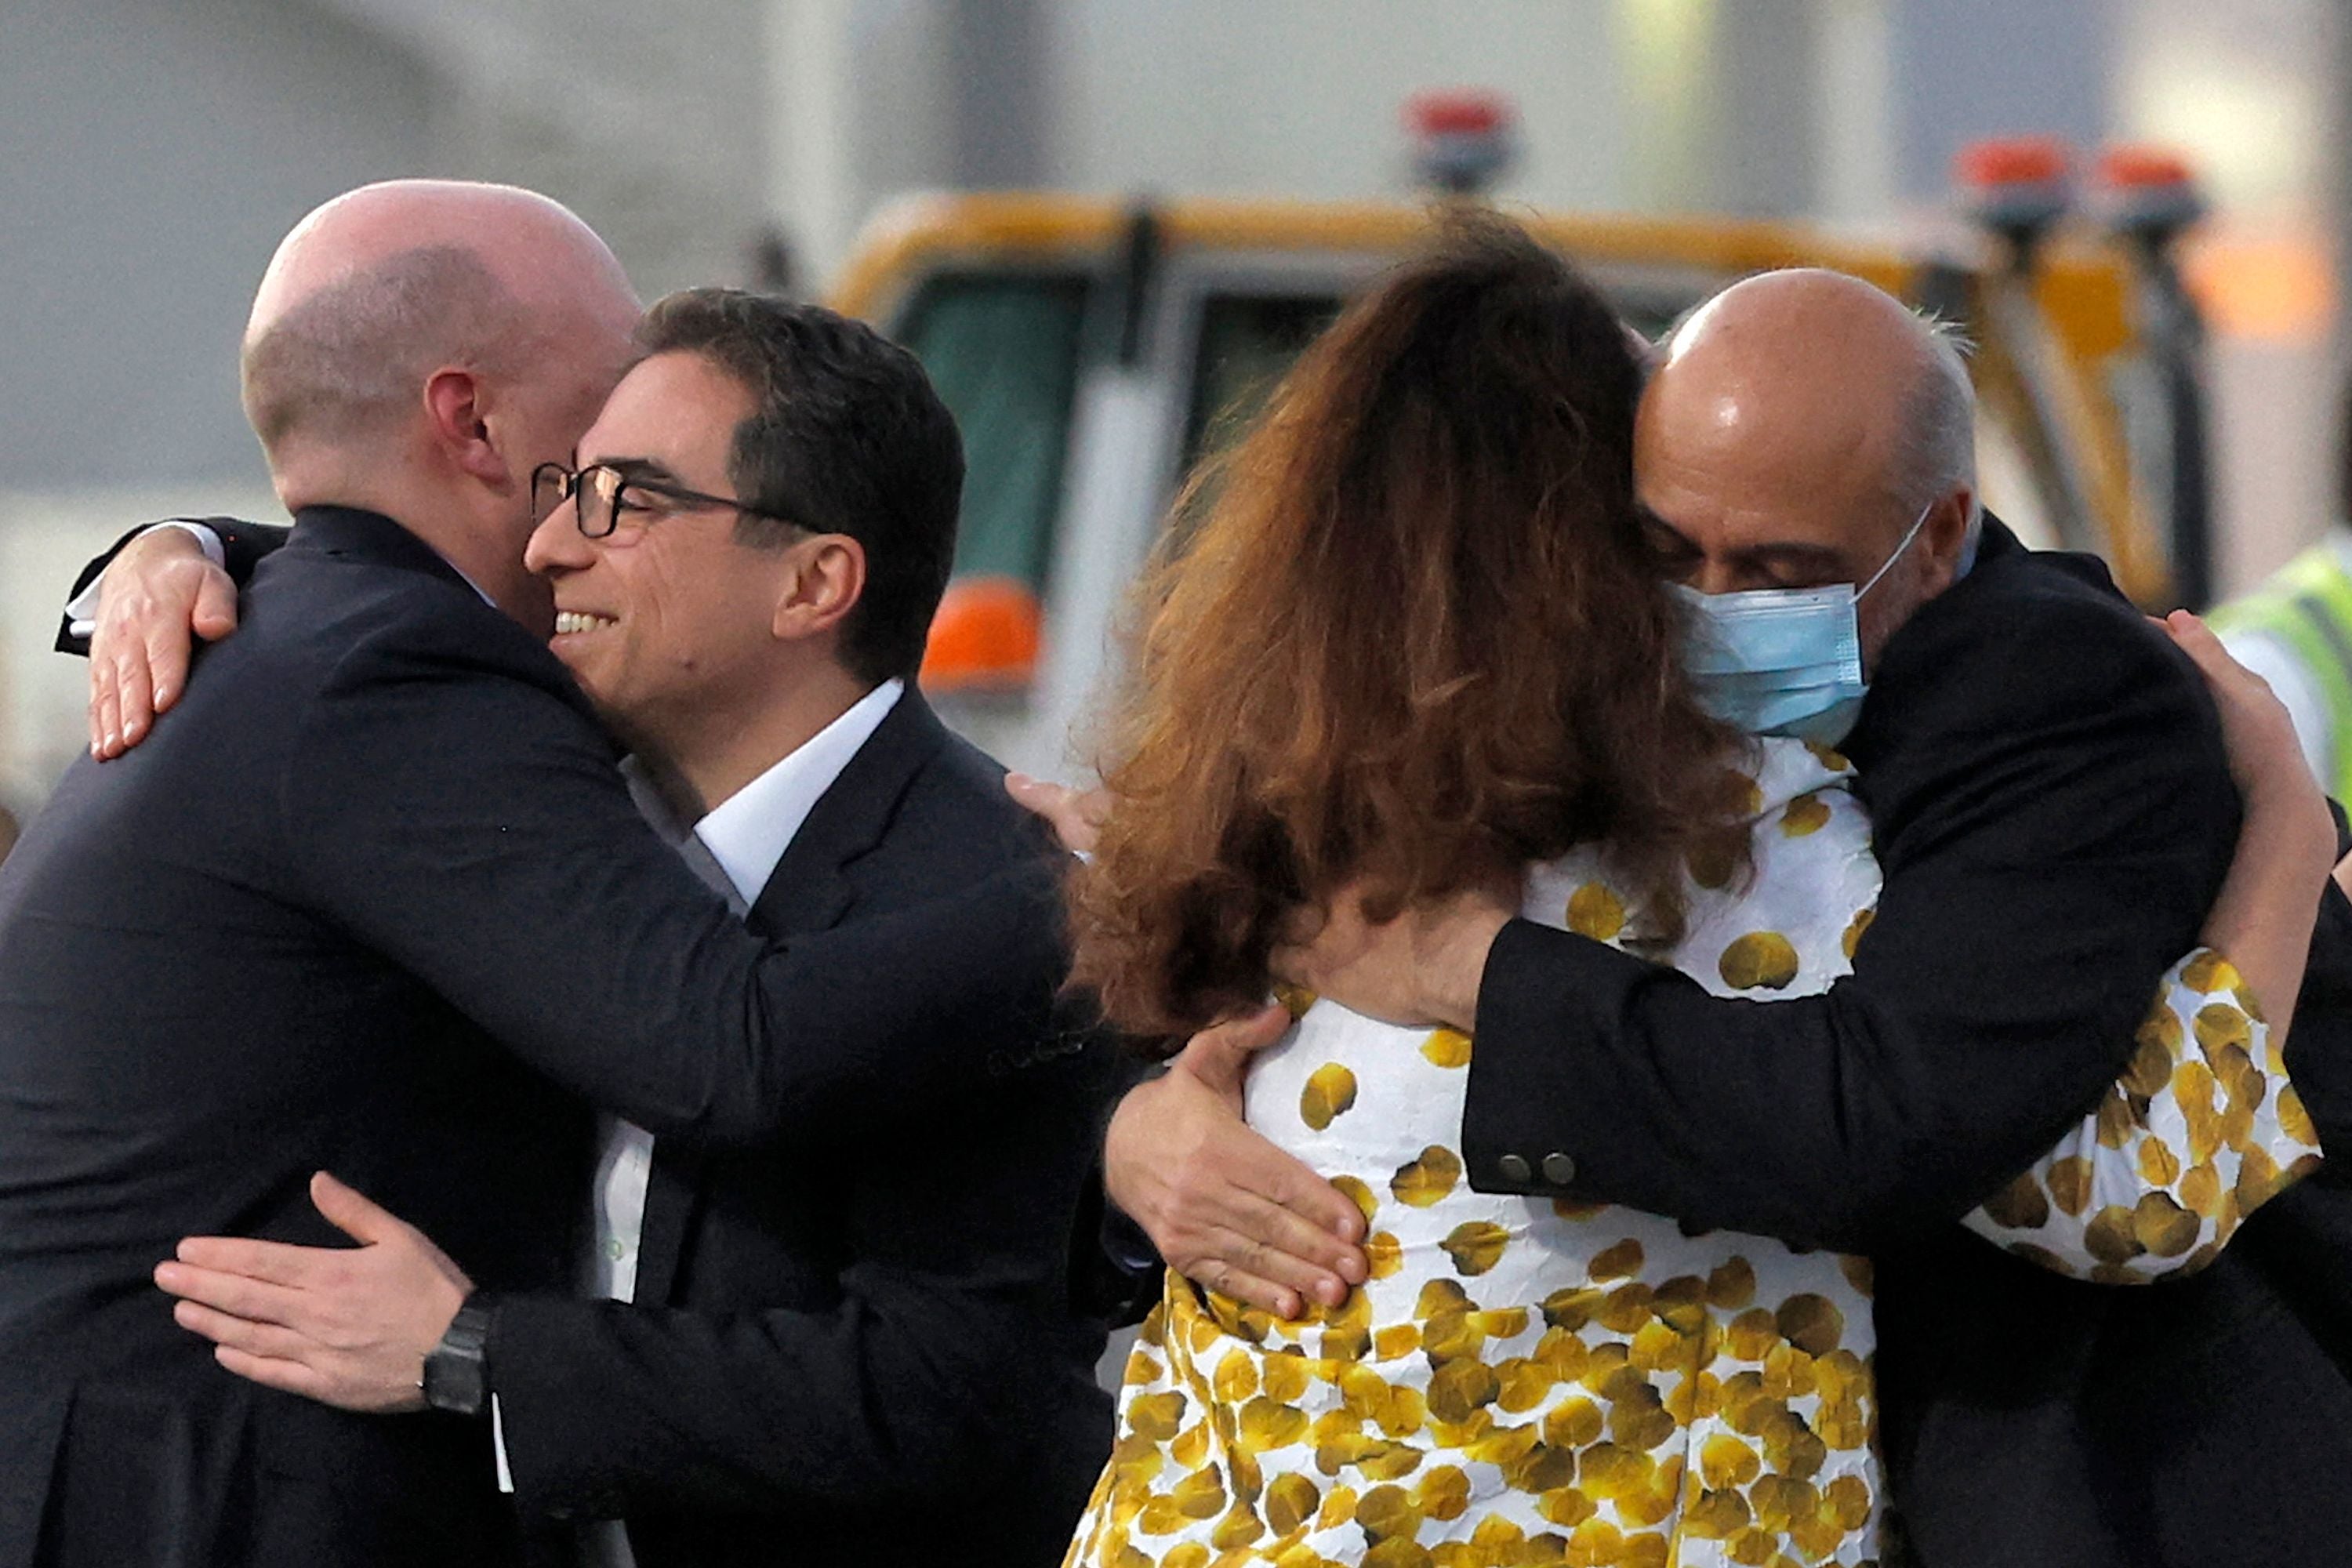 Mr Tahbaz (R, wearing mask) is welcomed on the tarmac at Doha airport after his release from Iran.